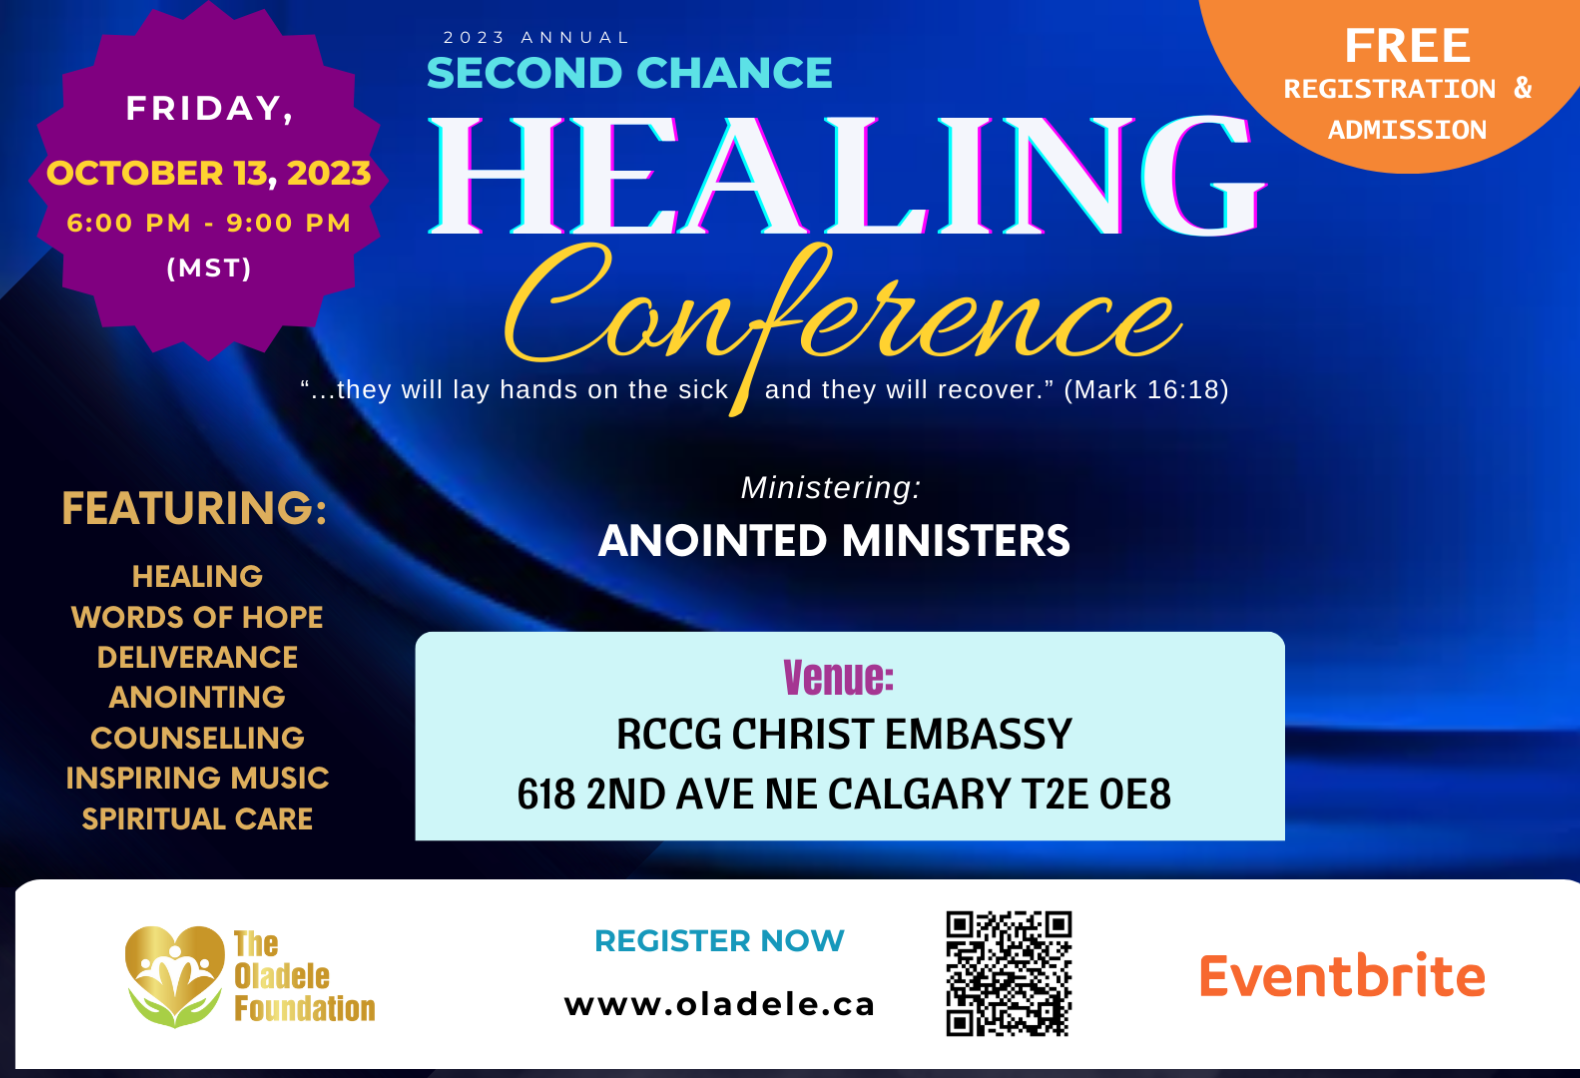 Second Chance Healing Conference Flyer